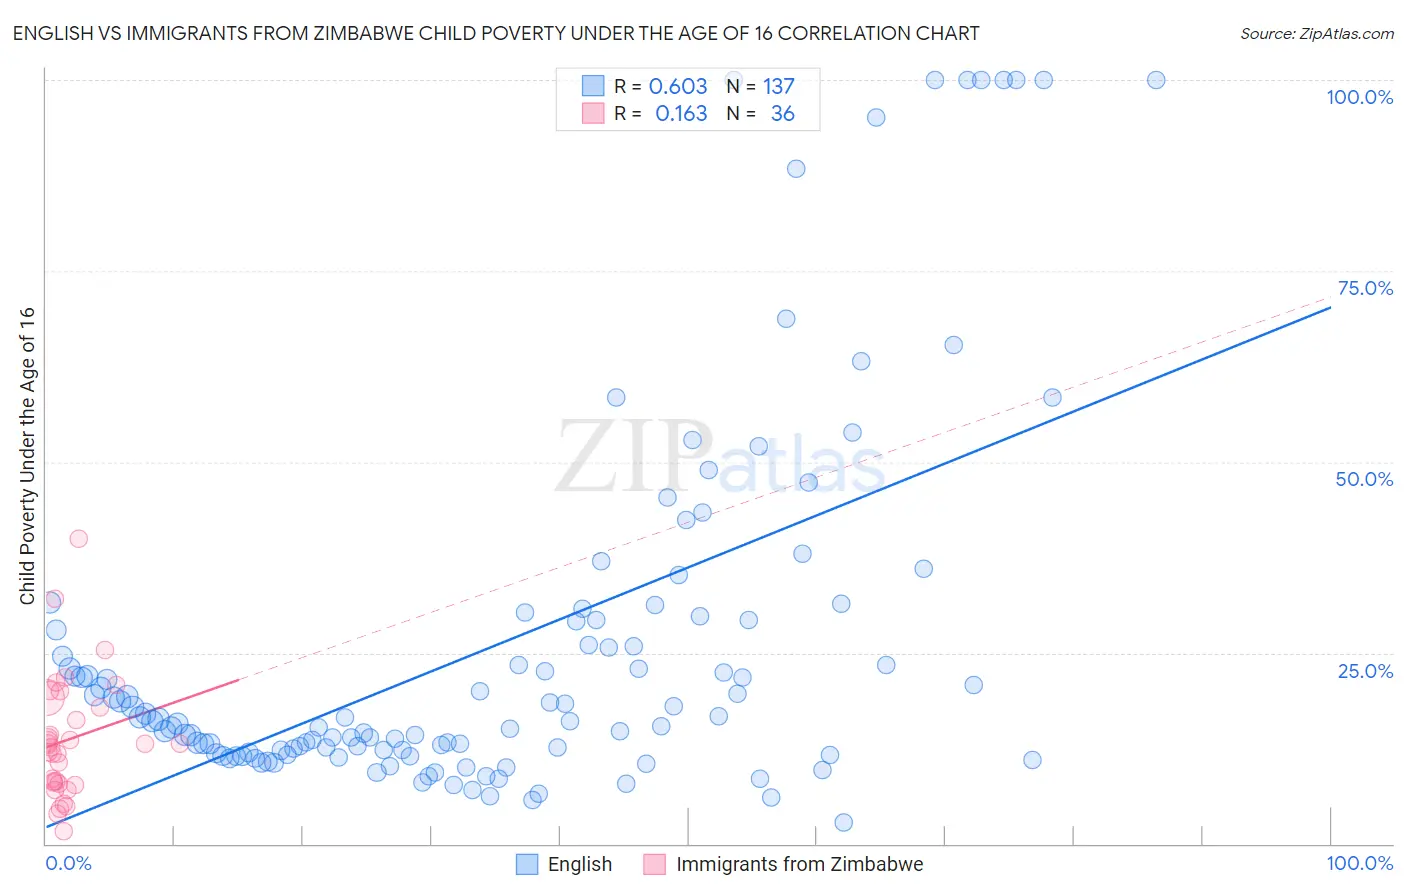 English vs Immigrants from Zimbabwe Child Poverty Under the Age of 16